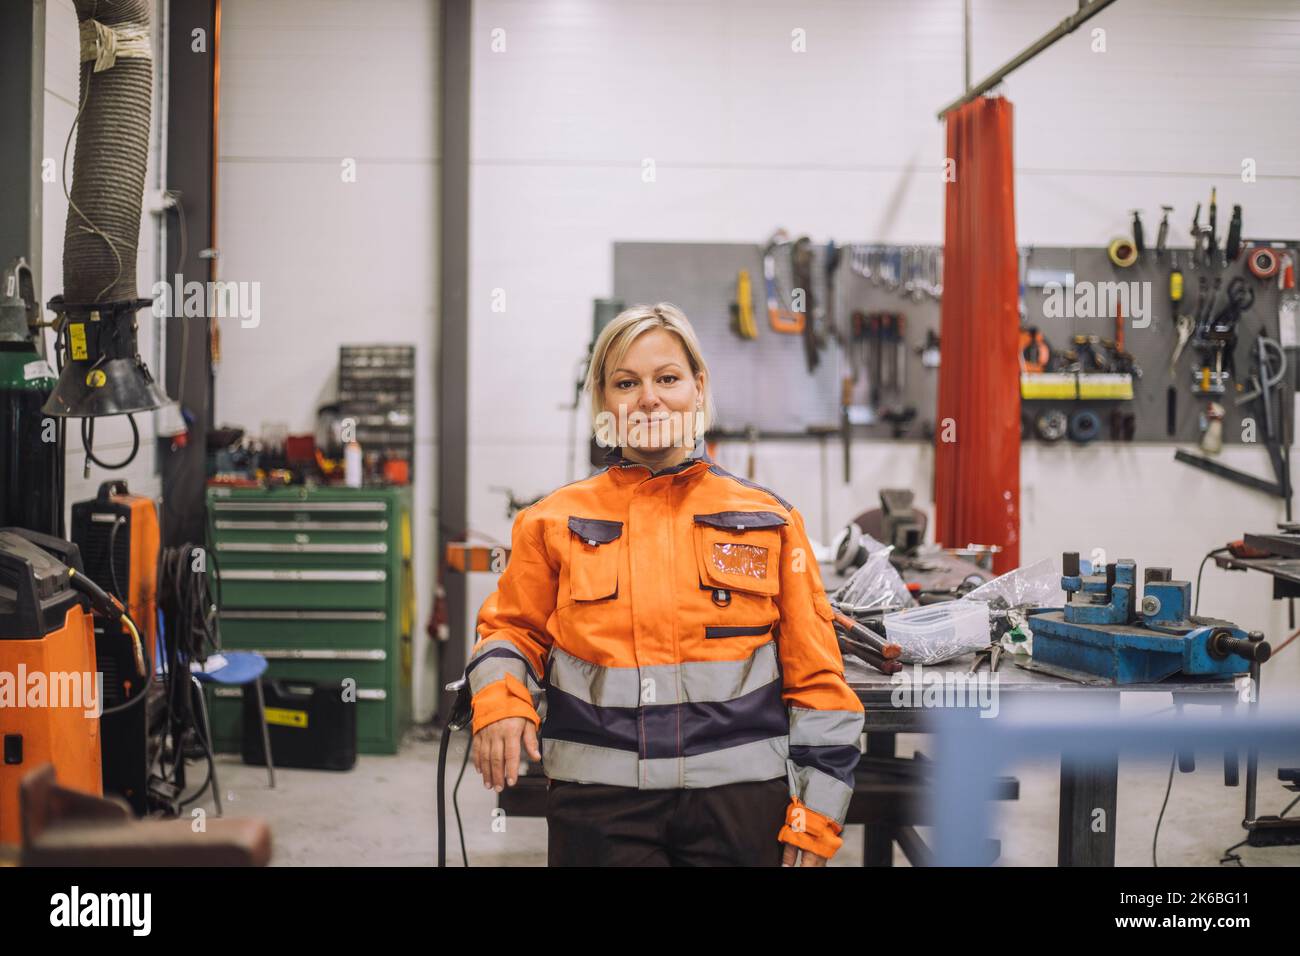 Portrait of smiling carpenter in reflective clothing standing in workshop Stock Photo